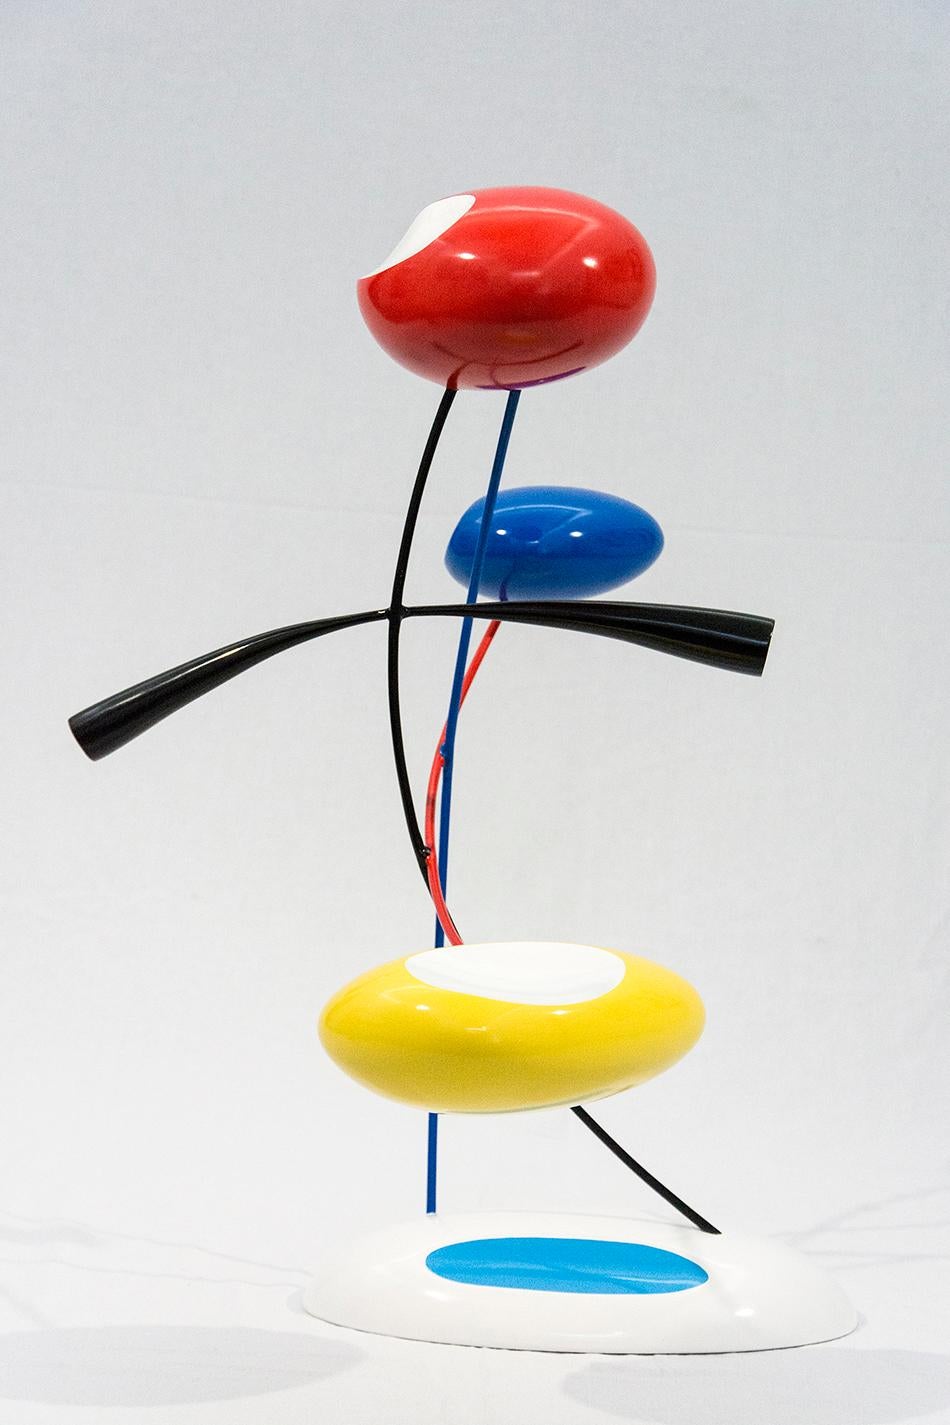 Benny Katz Abstract Sculpture - Flowers - playful abstract interior sculpture in red, blue, yellow and black